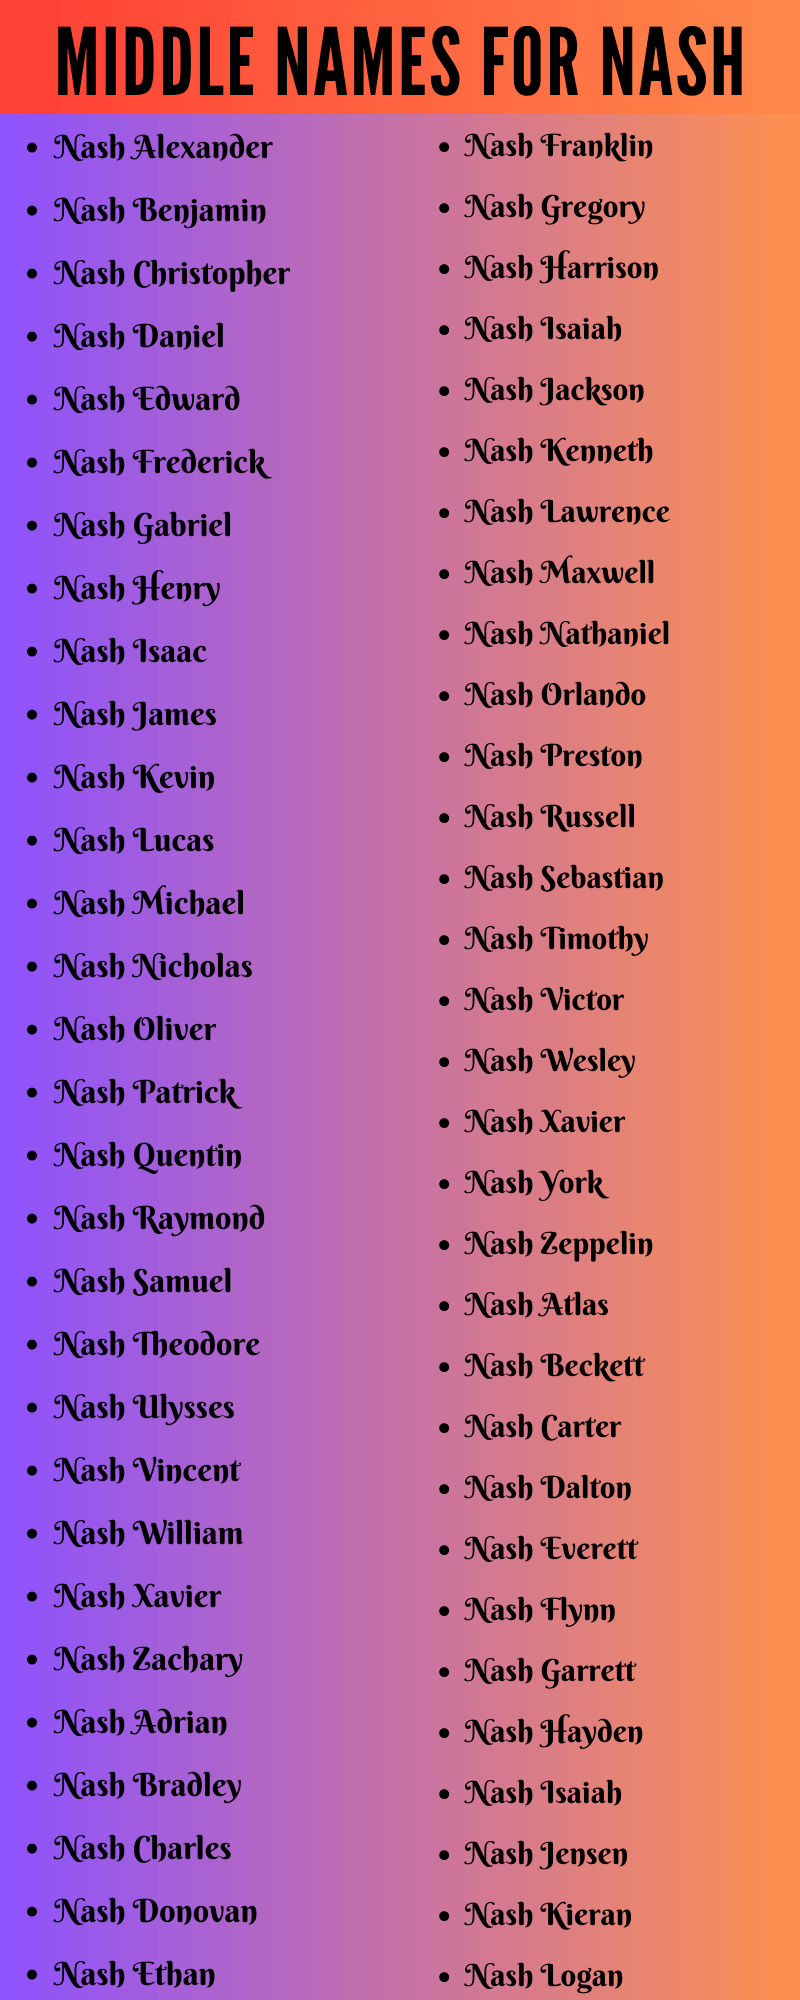 400 Classy Middle Names For Nash